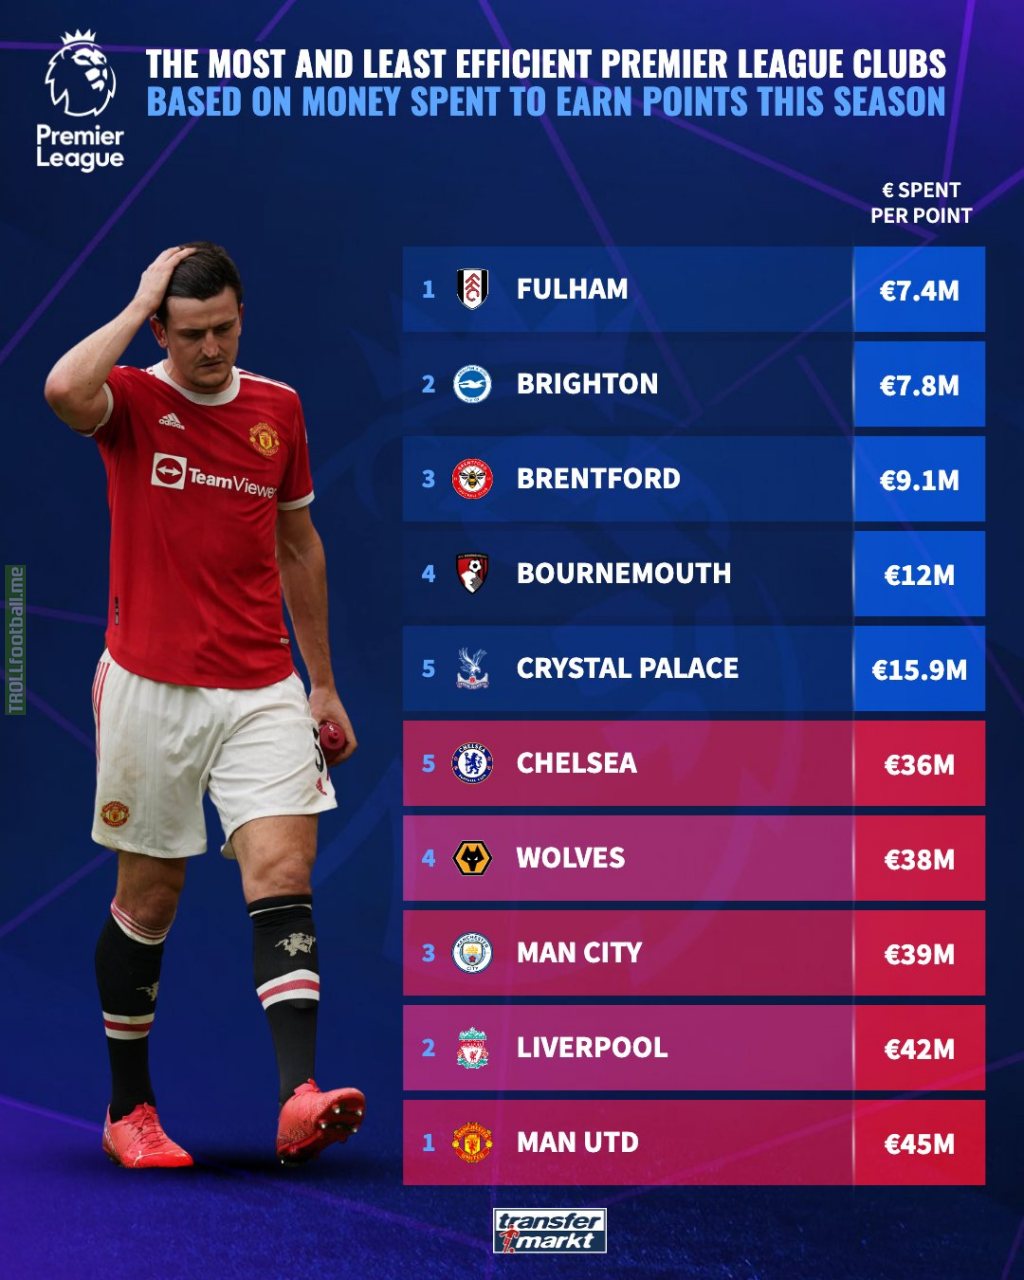 [Transfermarkt] Money spent to earn points in the Premier League this season, most and least efficient.